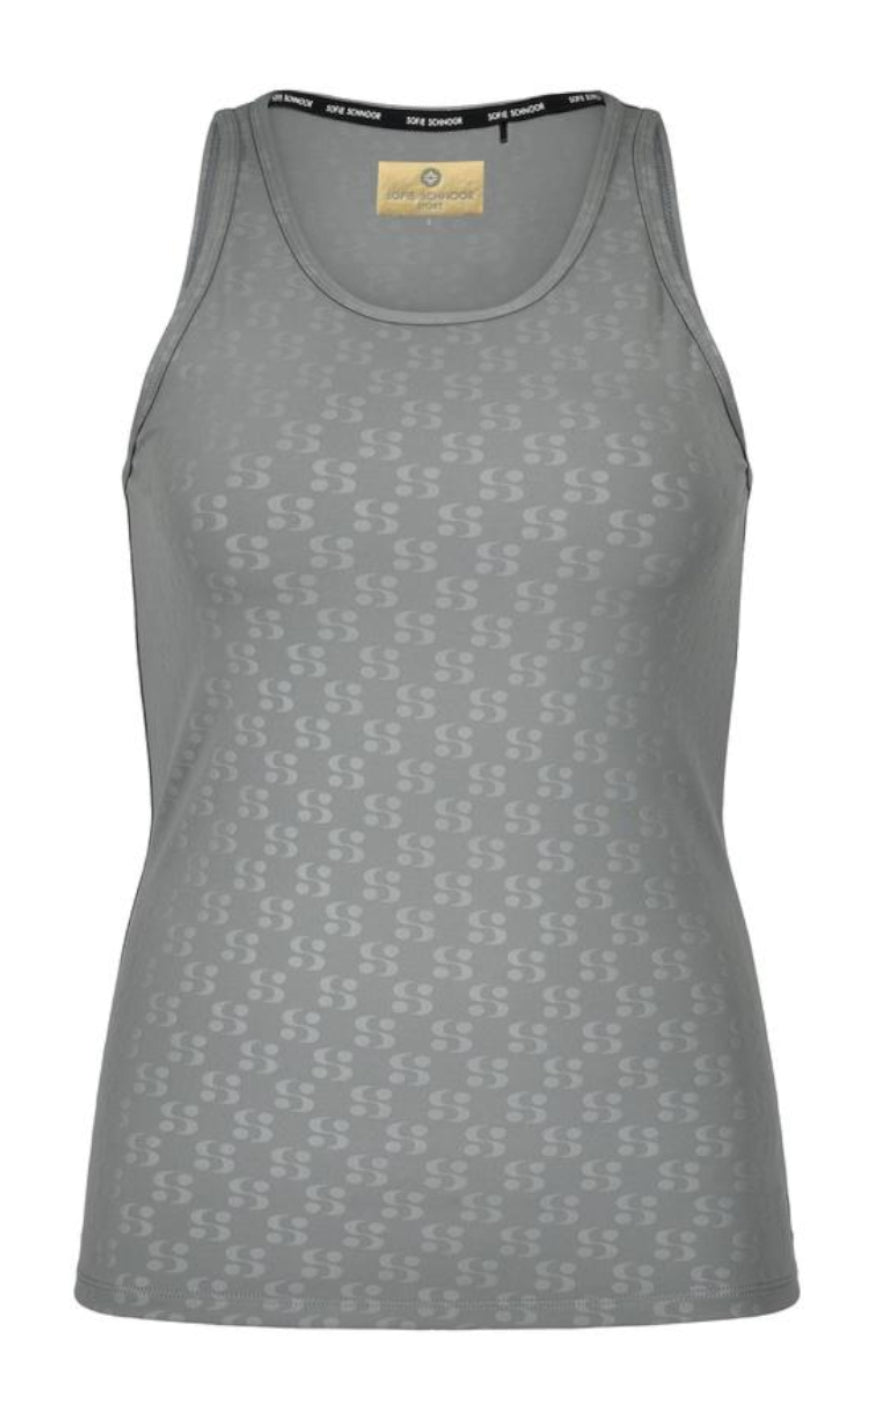 Se Sofie Schnoor Top - Janet SNOS406 - Charcoal Grey hos Fashionbystrand